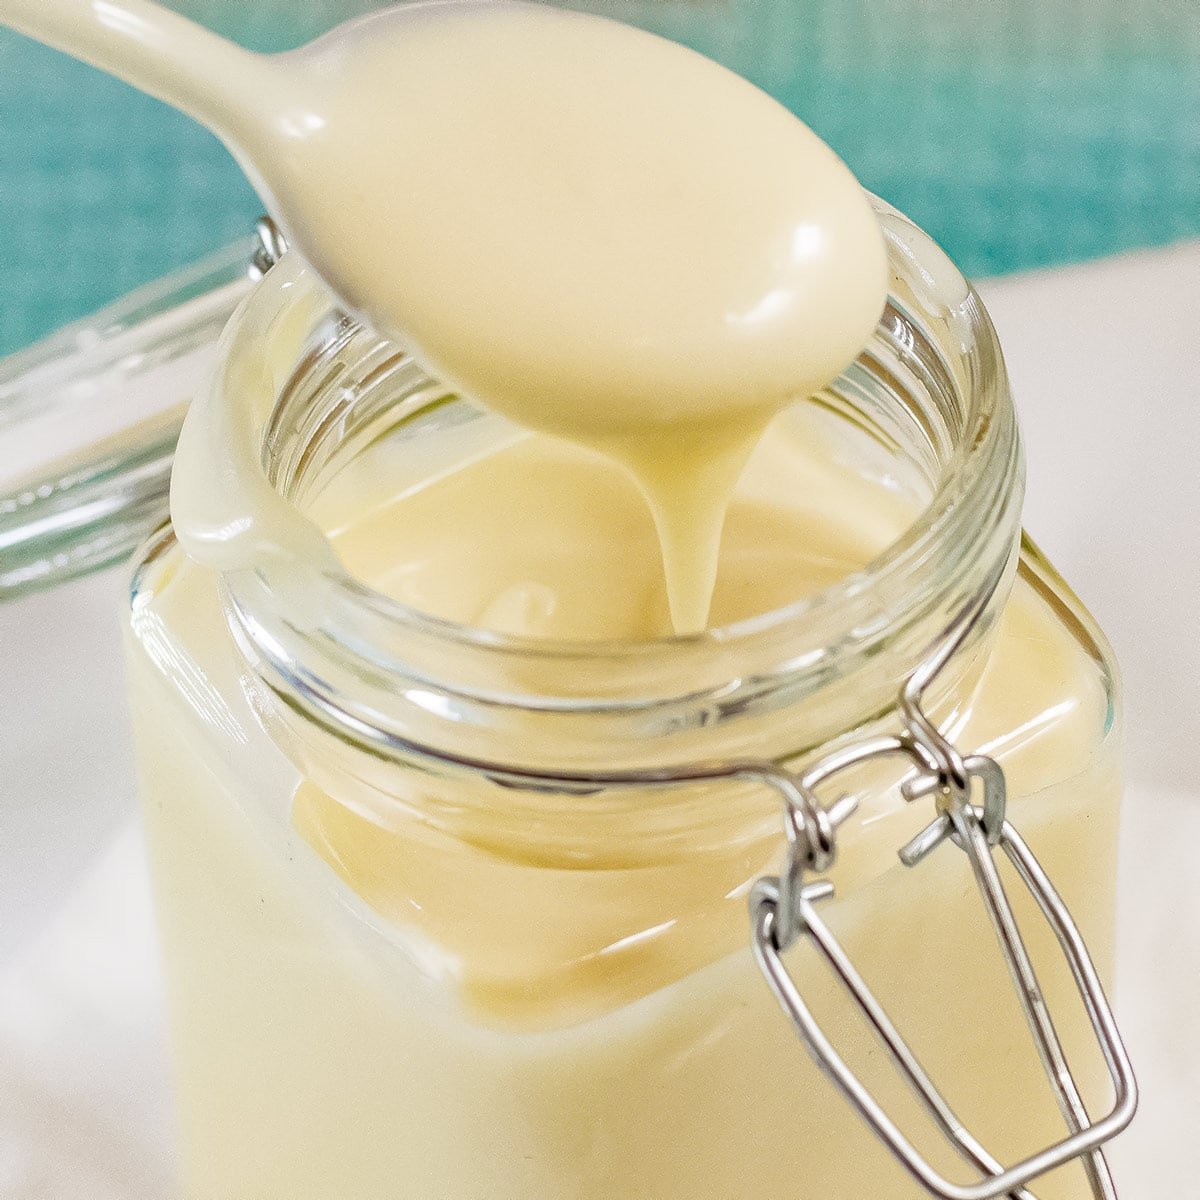 2-Minute Keto Olive Oil Mayonnaise - Keen for Keto